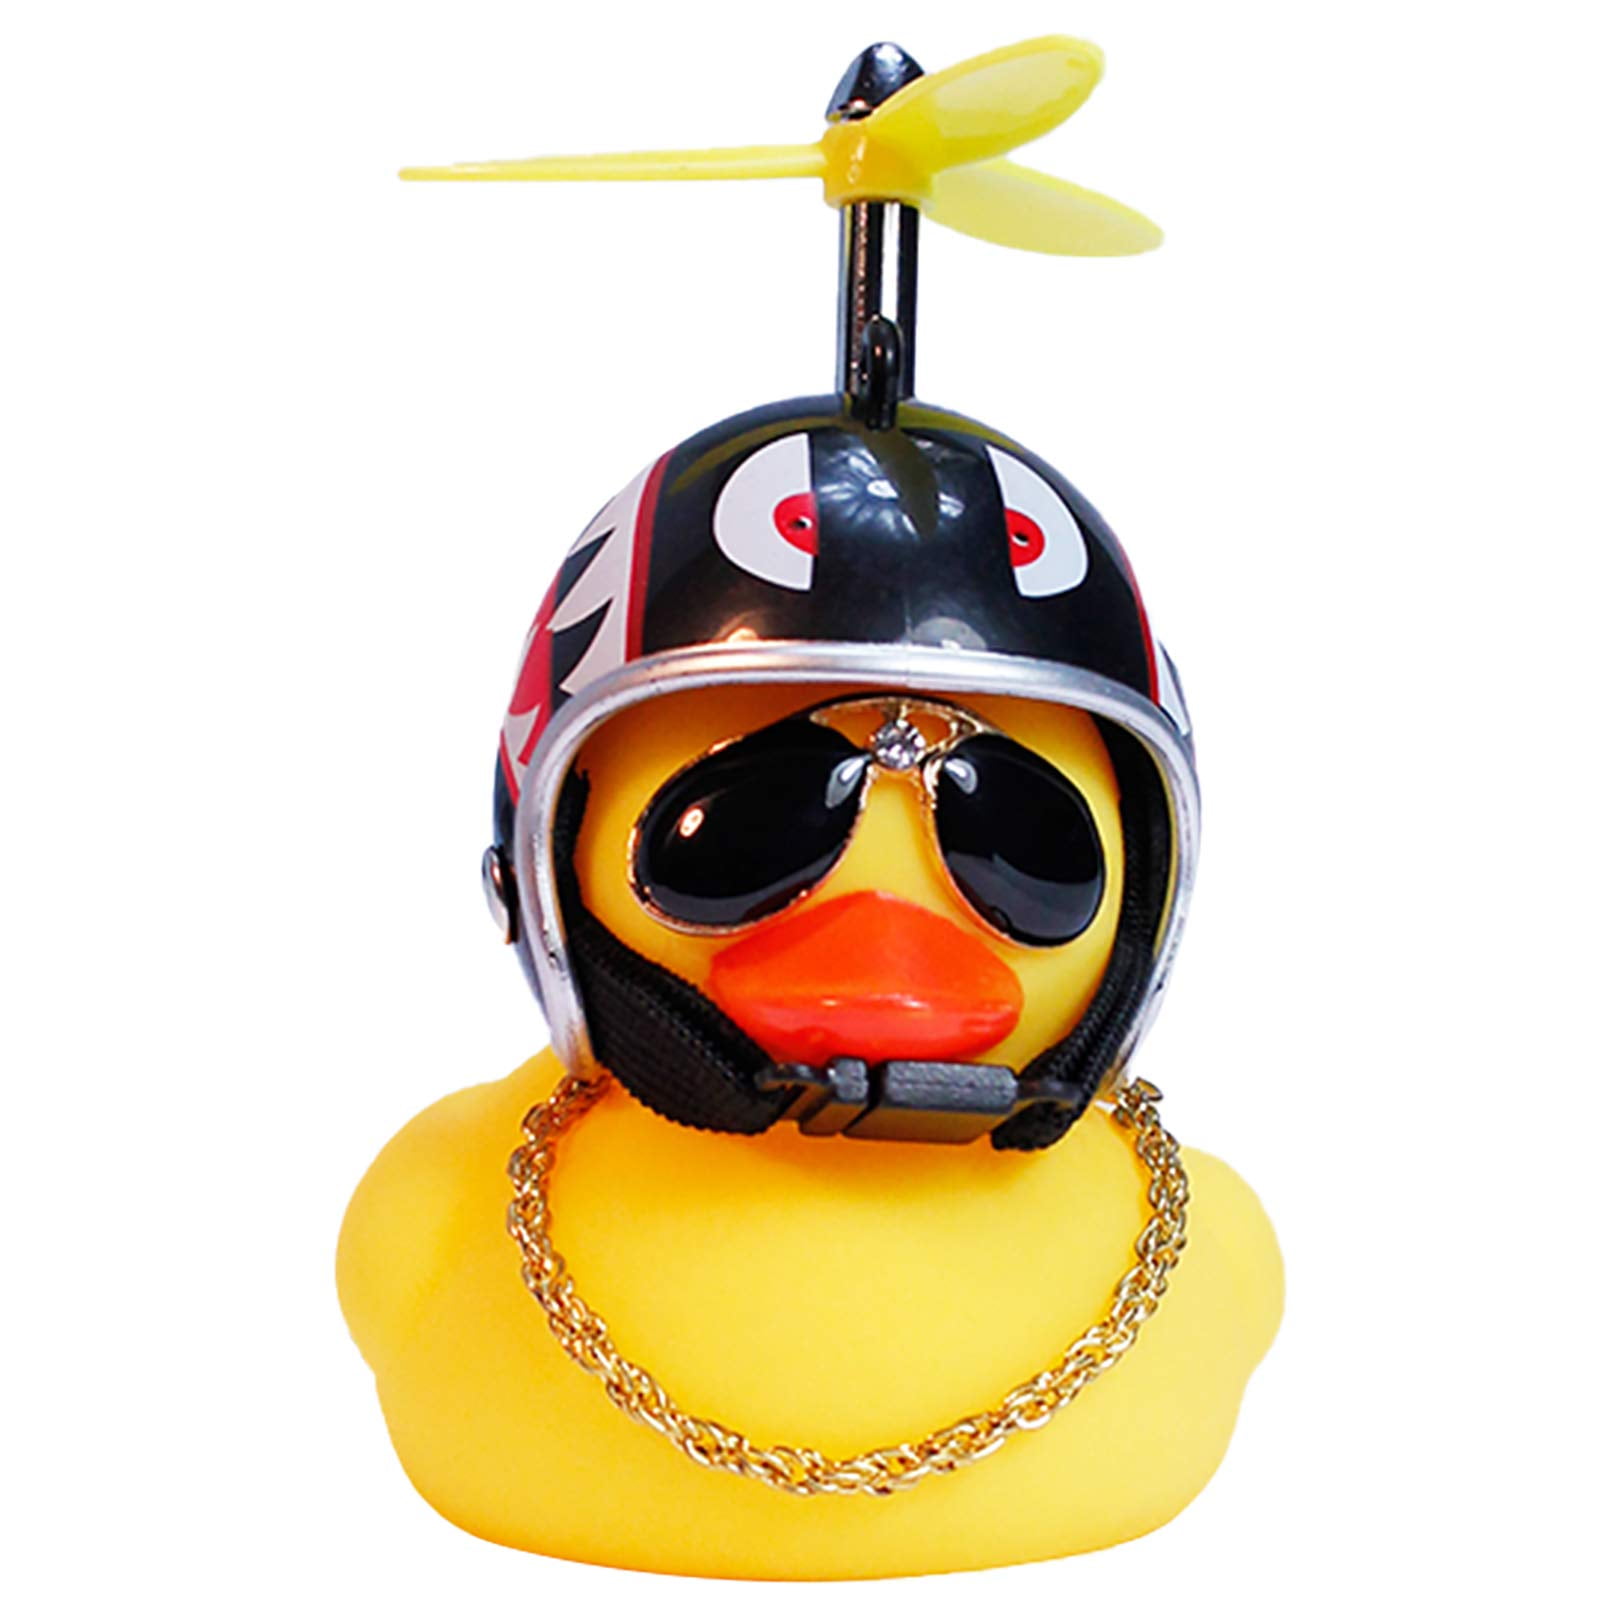 Novelty Yellow Rubber Duck With Helmet Sunglasses Car Dashboard